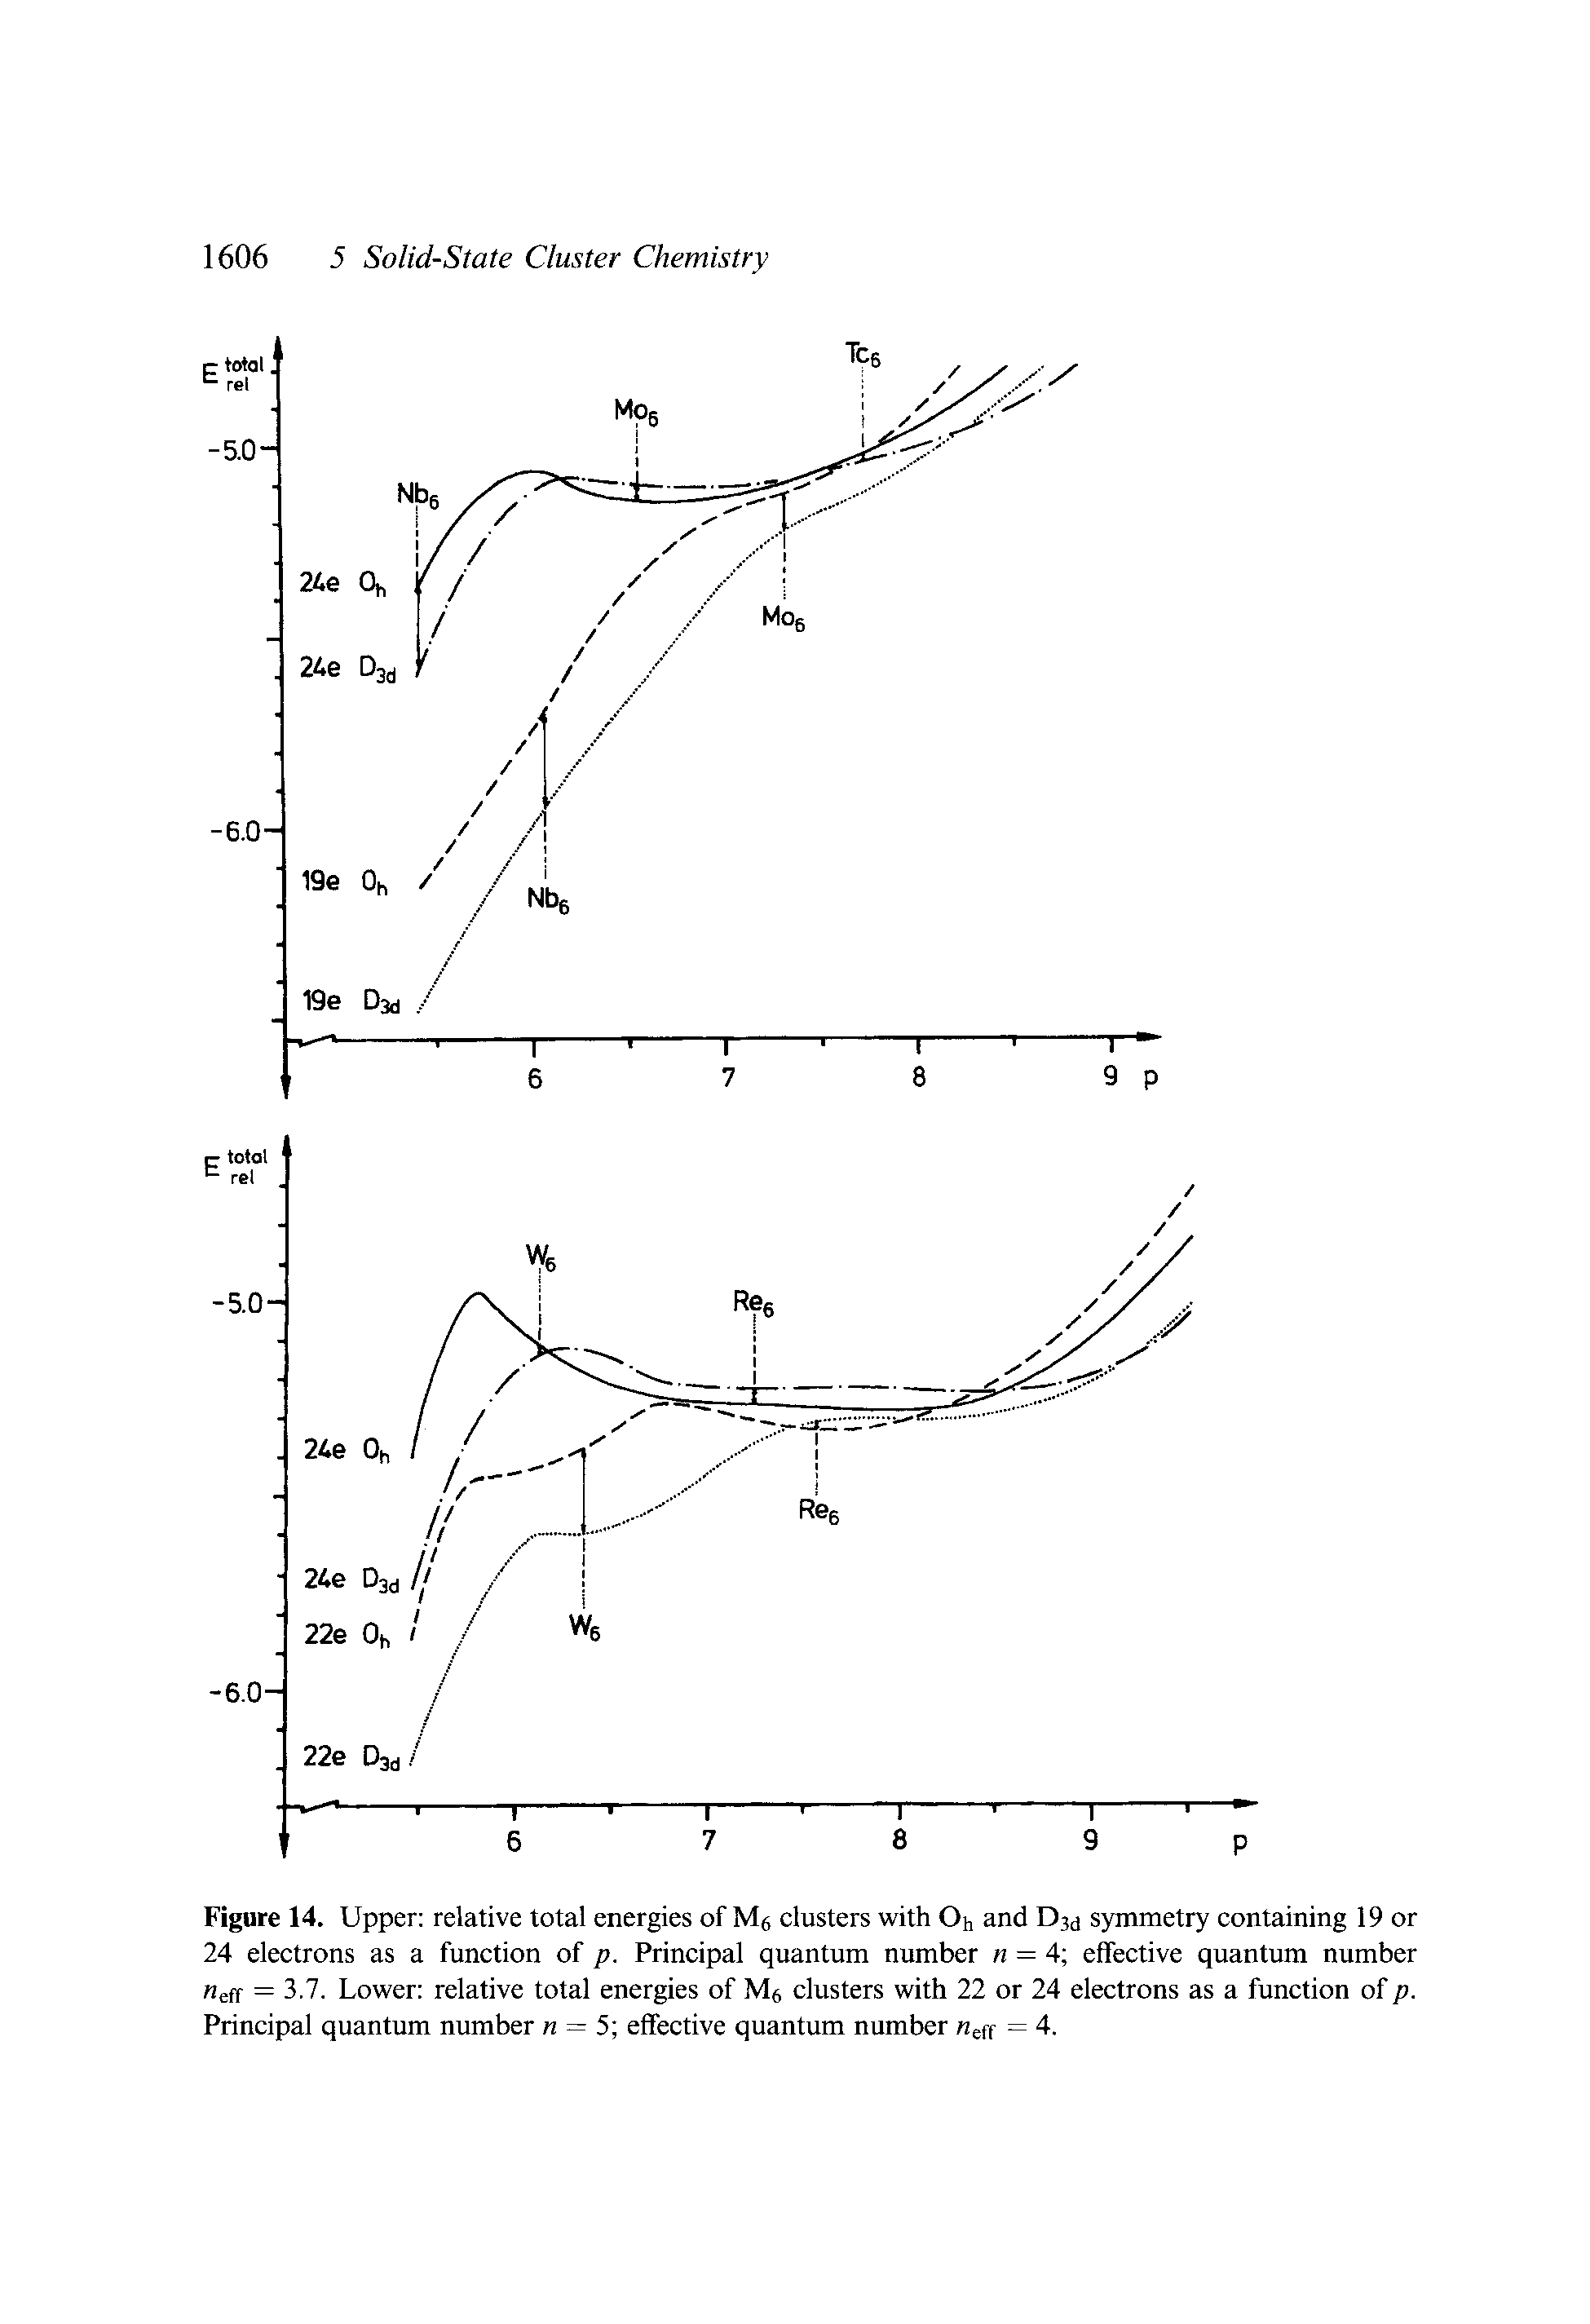 Figure 14. Upper relative total energies of M6 clusters with Oh and Dsj symmetry containing 19 or 24 electrons as a function of p. Principal quantum number = 4 effective quantum number eff = 3.7. Lower relative total energies of Ma clusters with 22 or 24 electrons as a function of p. Principal quantum number n = 5 effective quantum number n ff = 4.